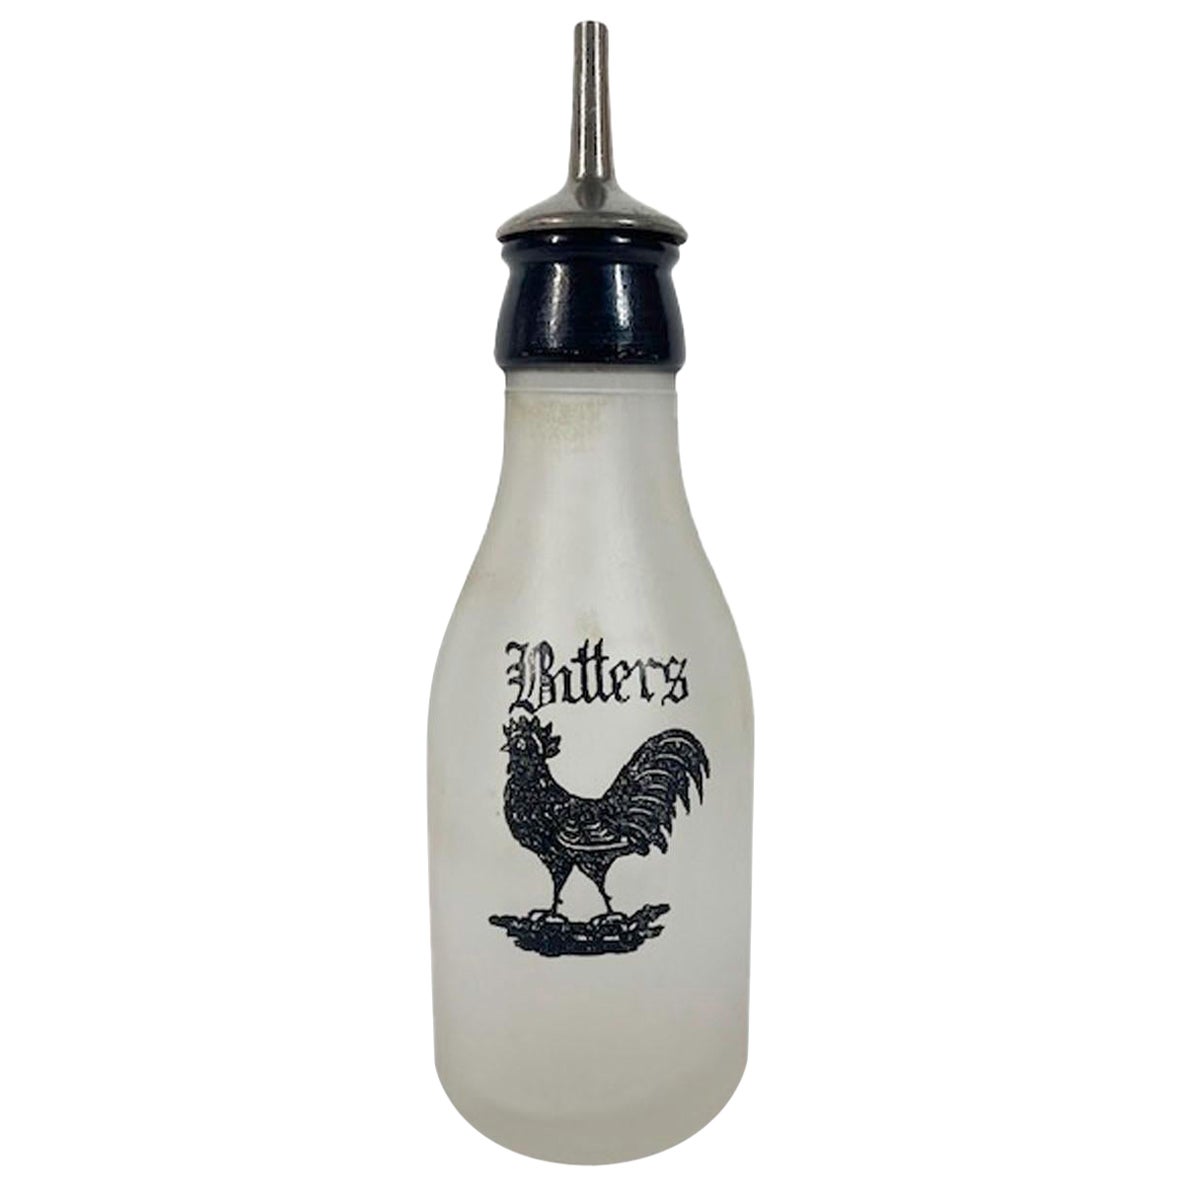 Art Deco Bitters Bottle with Pour Stopper and Black Enamel Rooster & "Bitters"